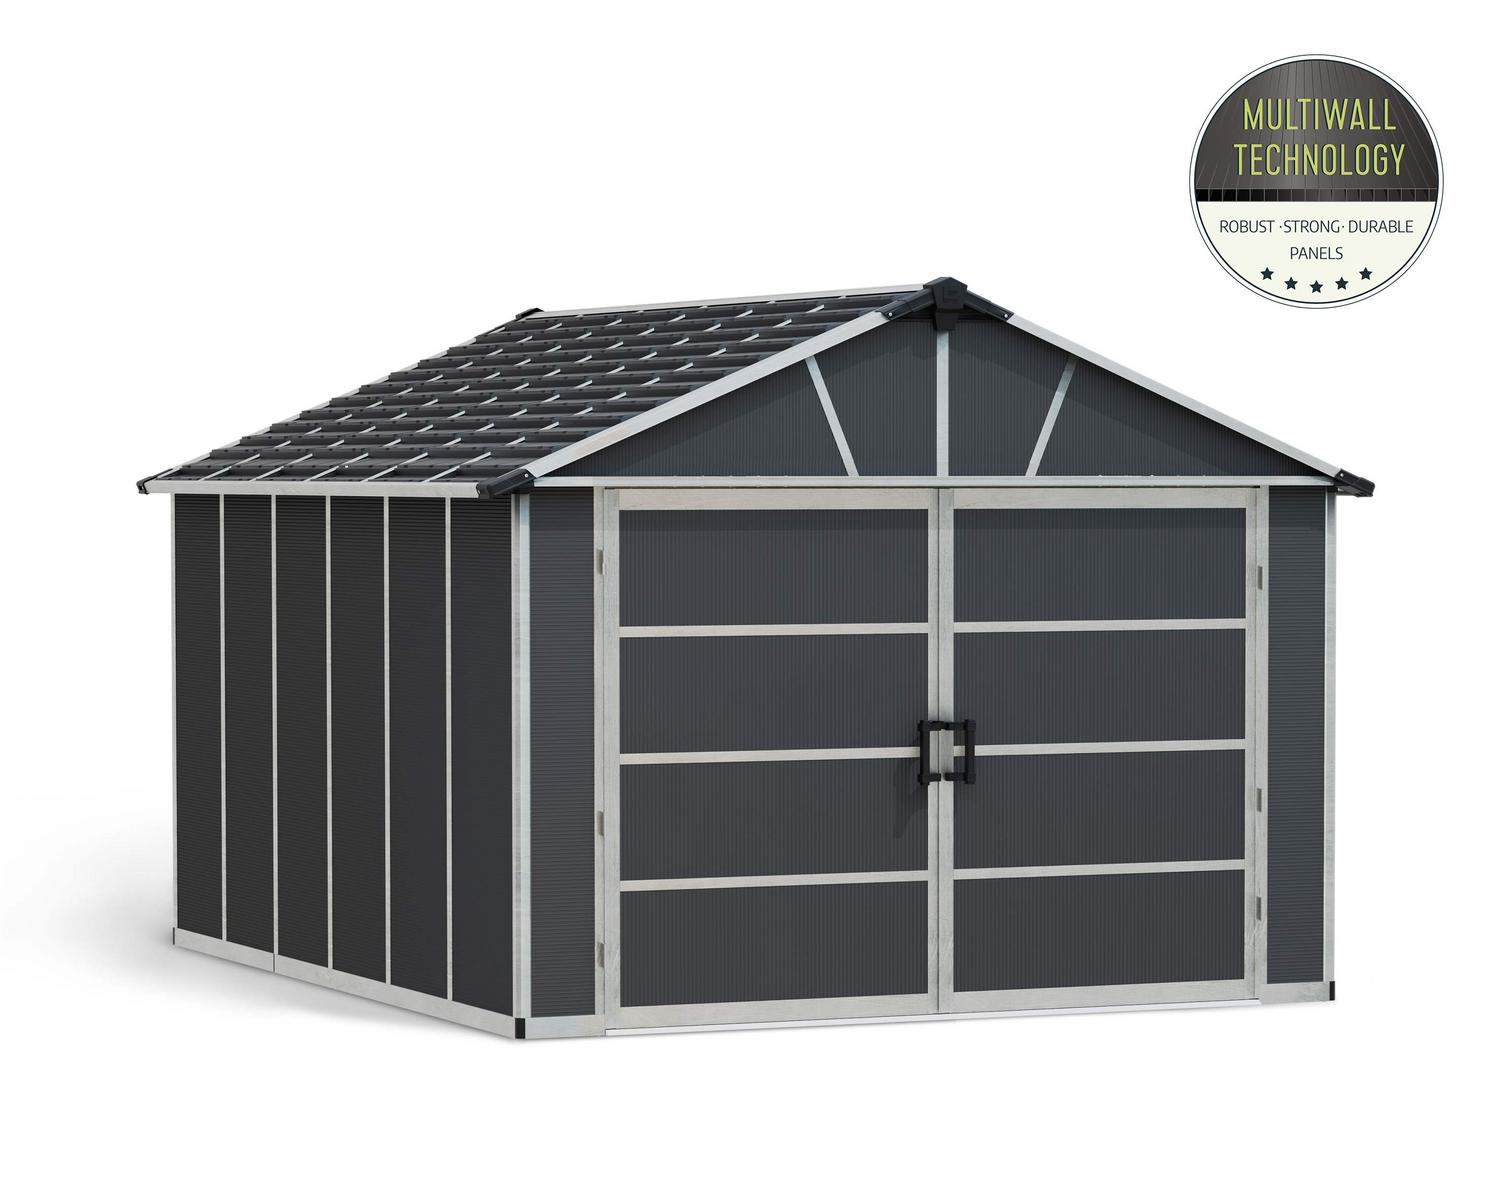 Plastic Garage Shed with Double Door Yukon 11 ft. x 13 ft. Dark Grey Polycarbonate Multiwall and Aluminum Frame